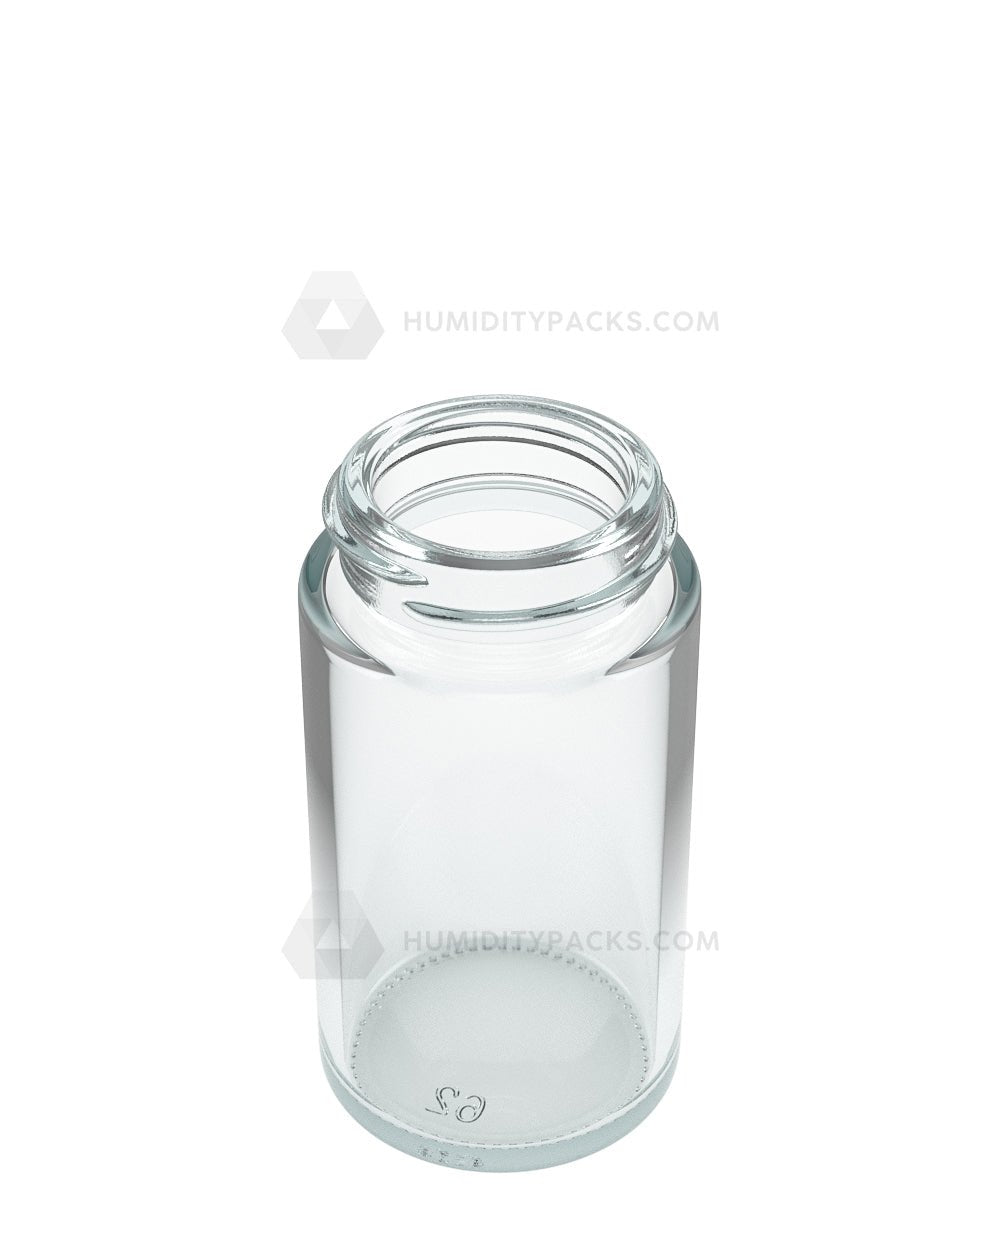 38mm Wide Mouth Straight Clear 2oz Glass Jar 180/Box Humidity Packs - 2